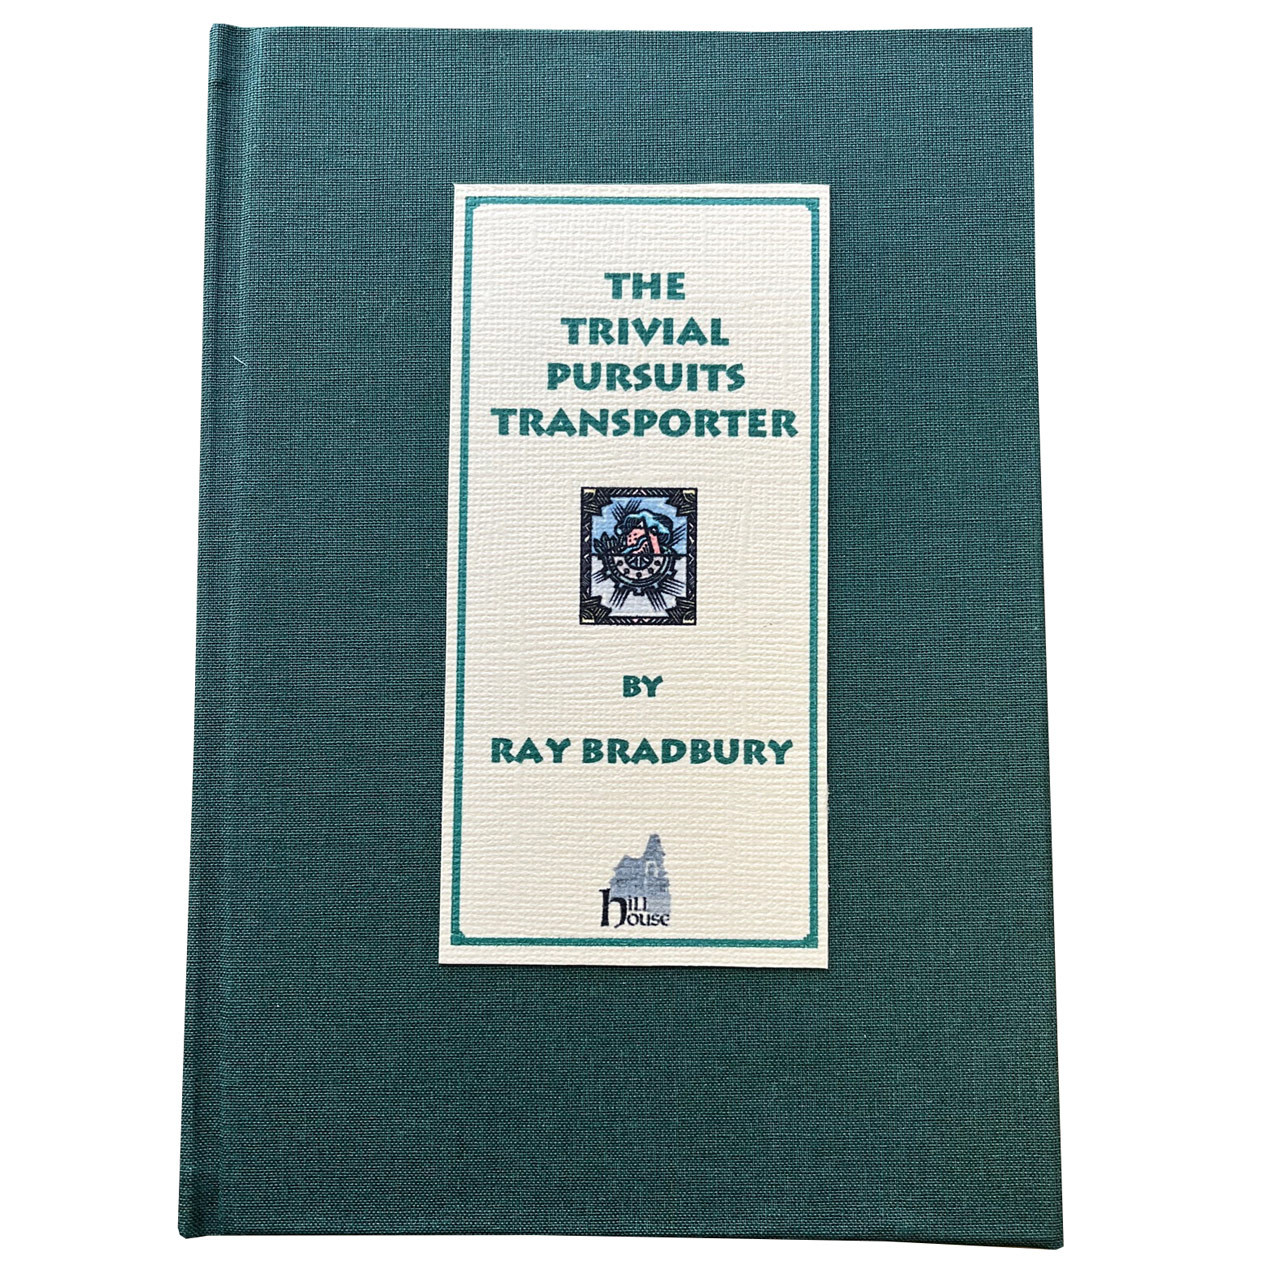 Ray Bradbury "The Trivial Pursuits Transporter" Signed Limited Edition No. 5 of 25 [Very Fine]